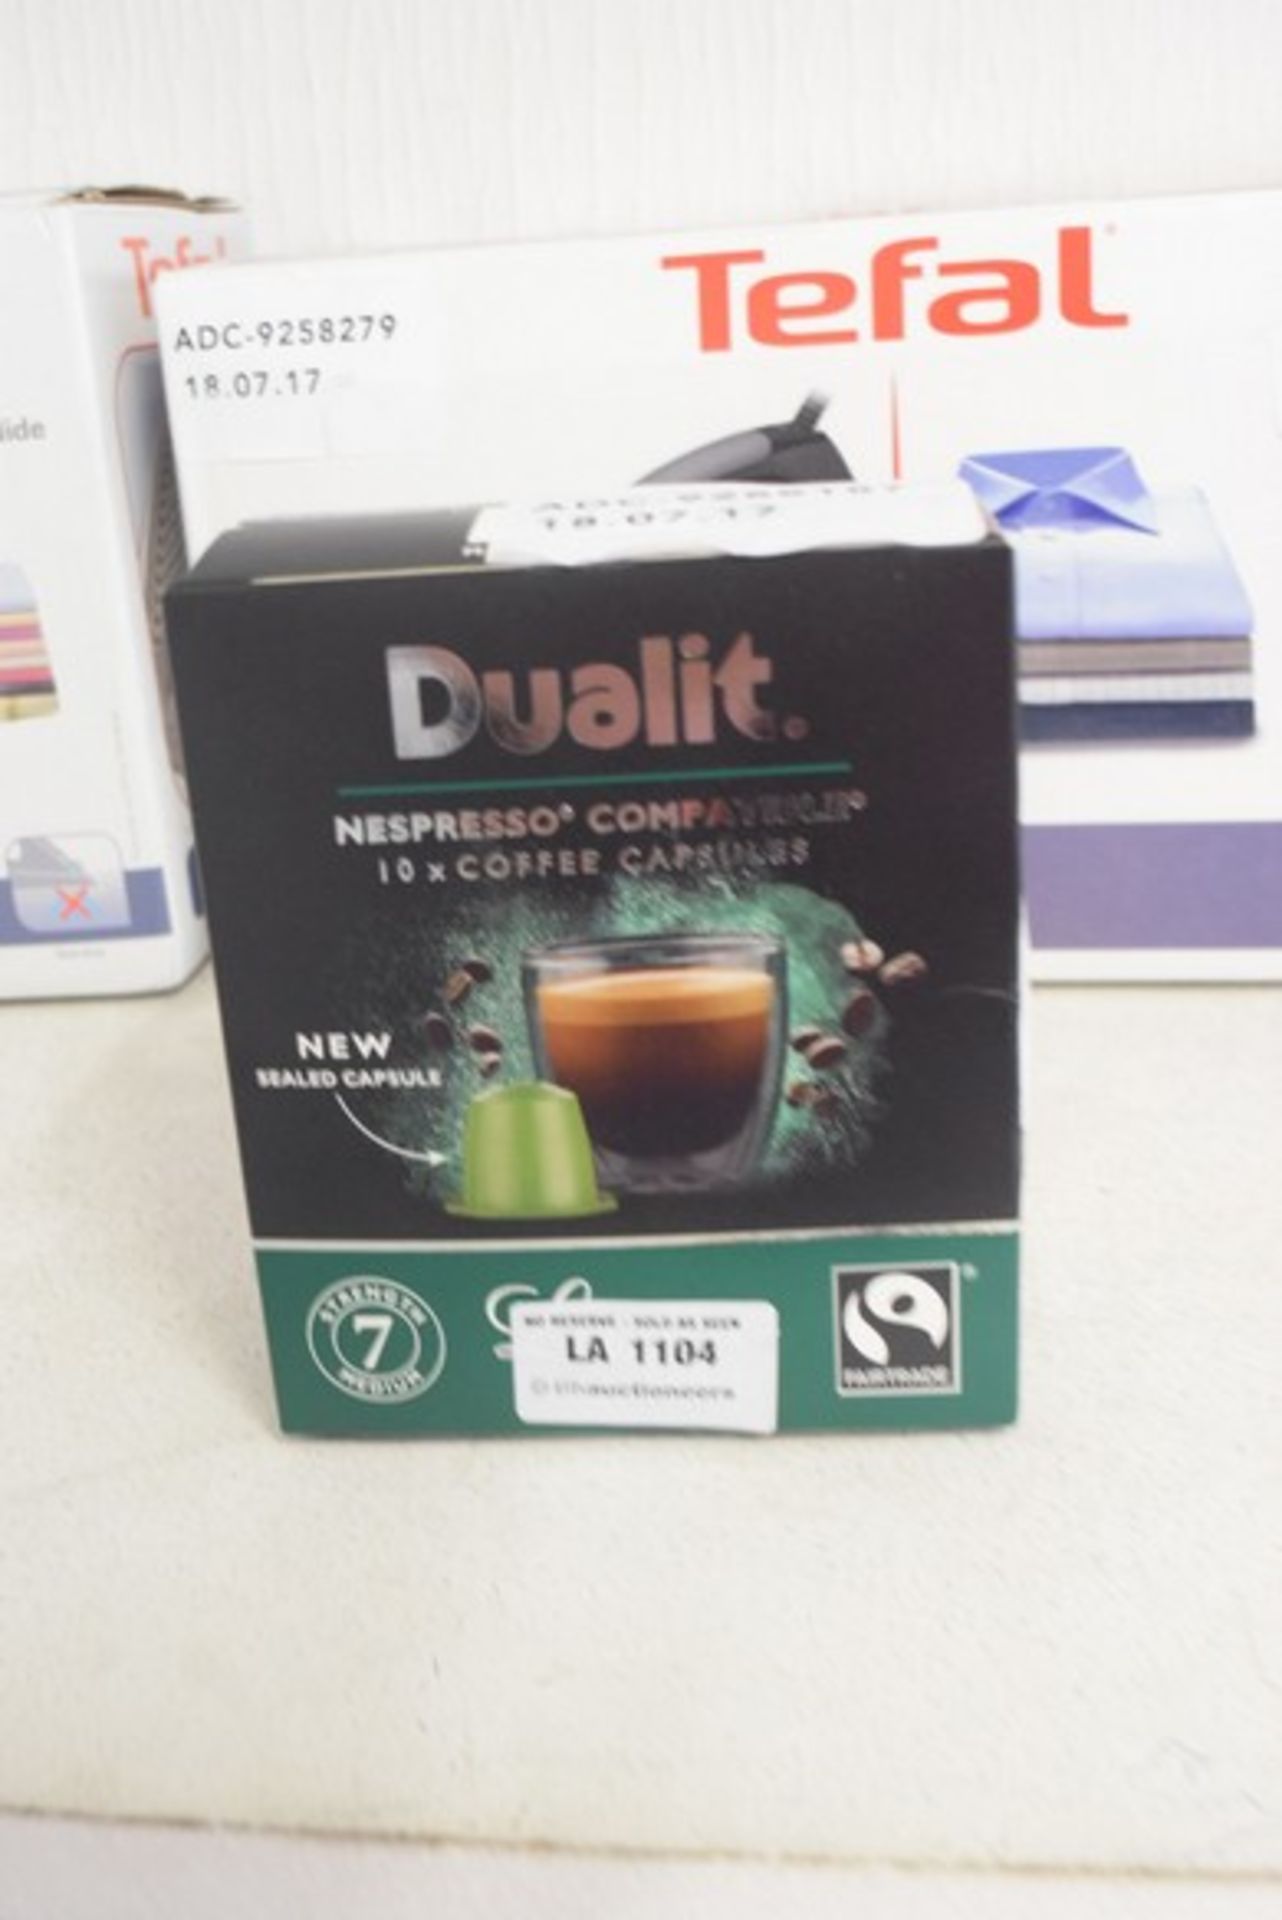 1 x DUALIT LUNGO AMERICANO MX CAPSULES RRP £3 18.07.17 *PLEASE NOTE THAT THE BID PRICE IS MULTIPLIED